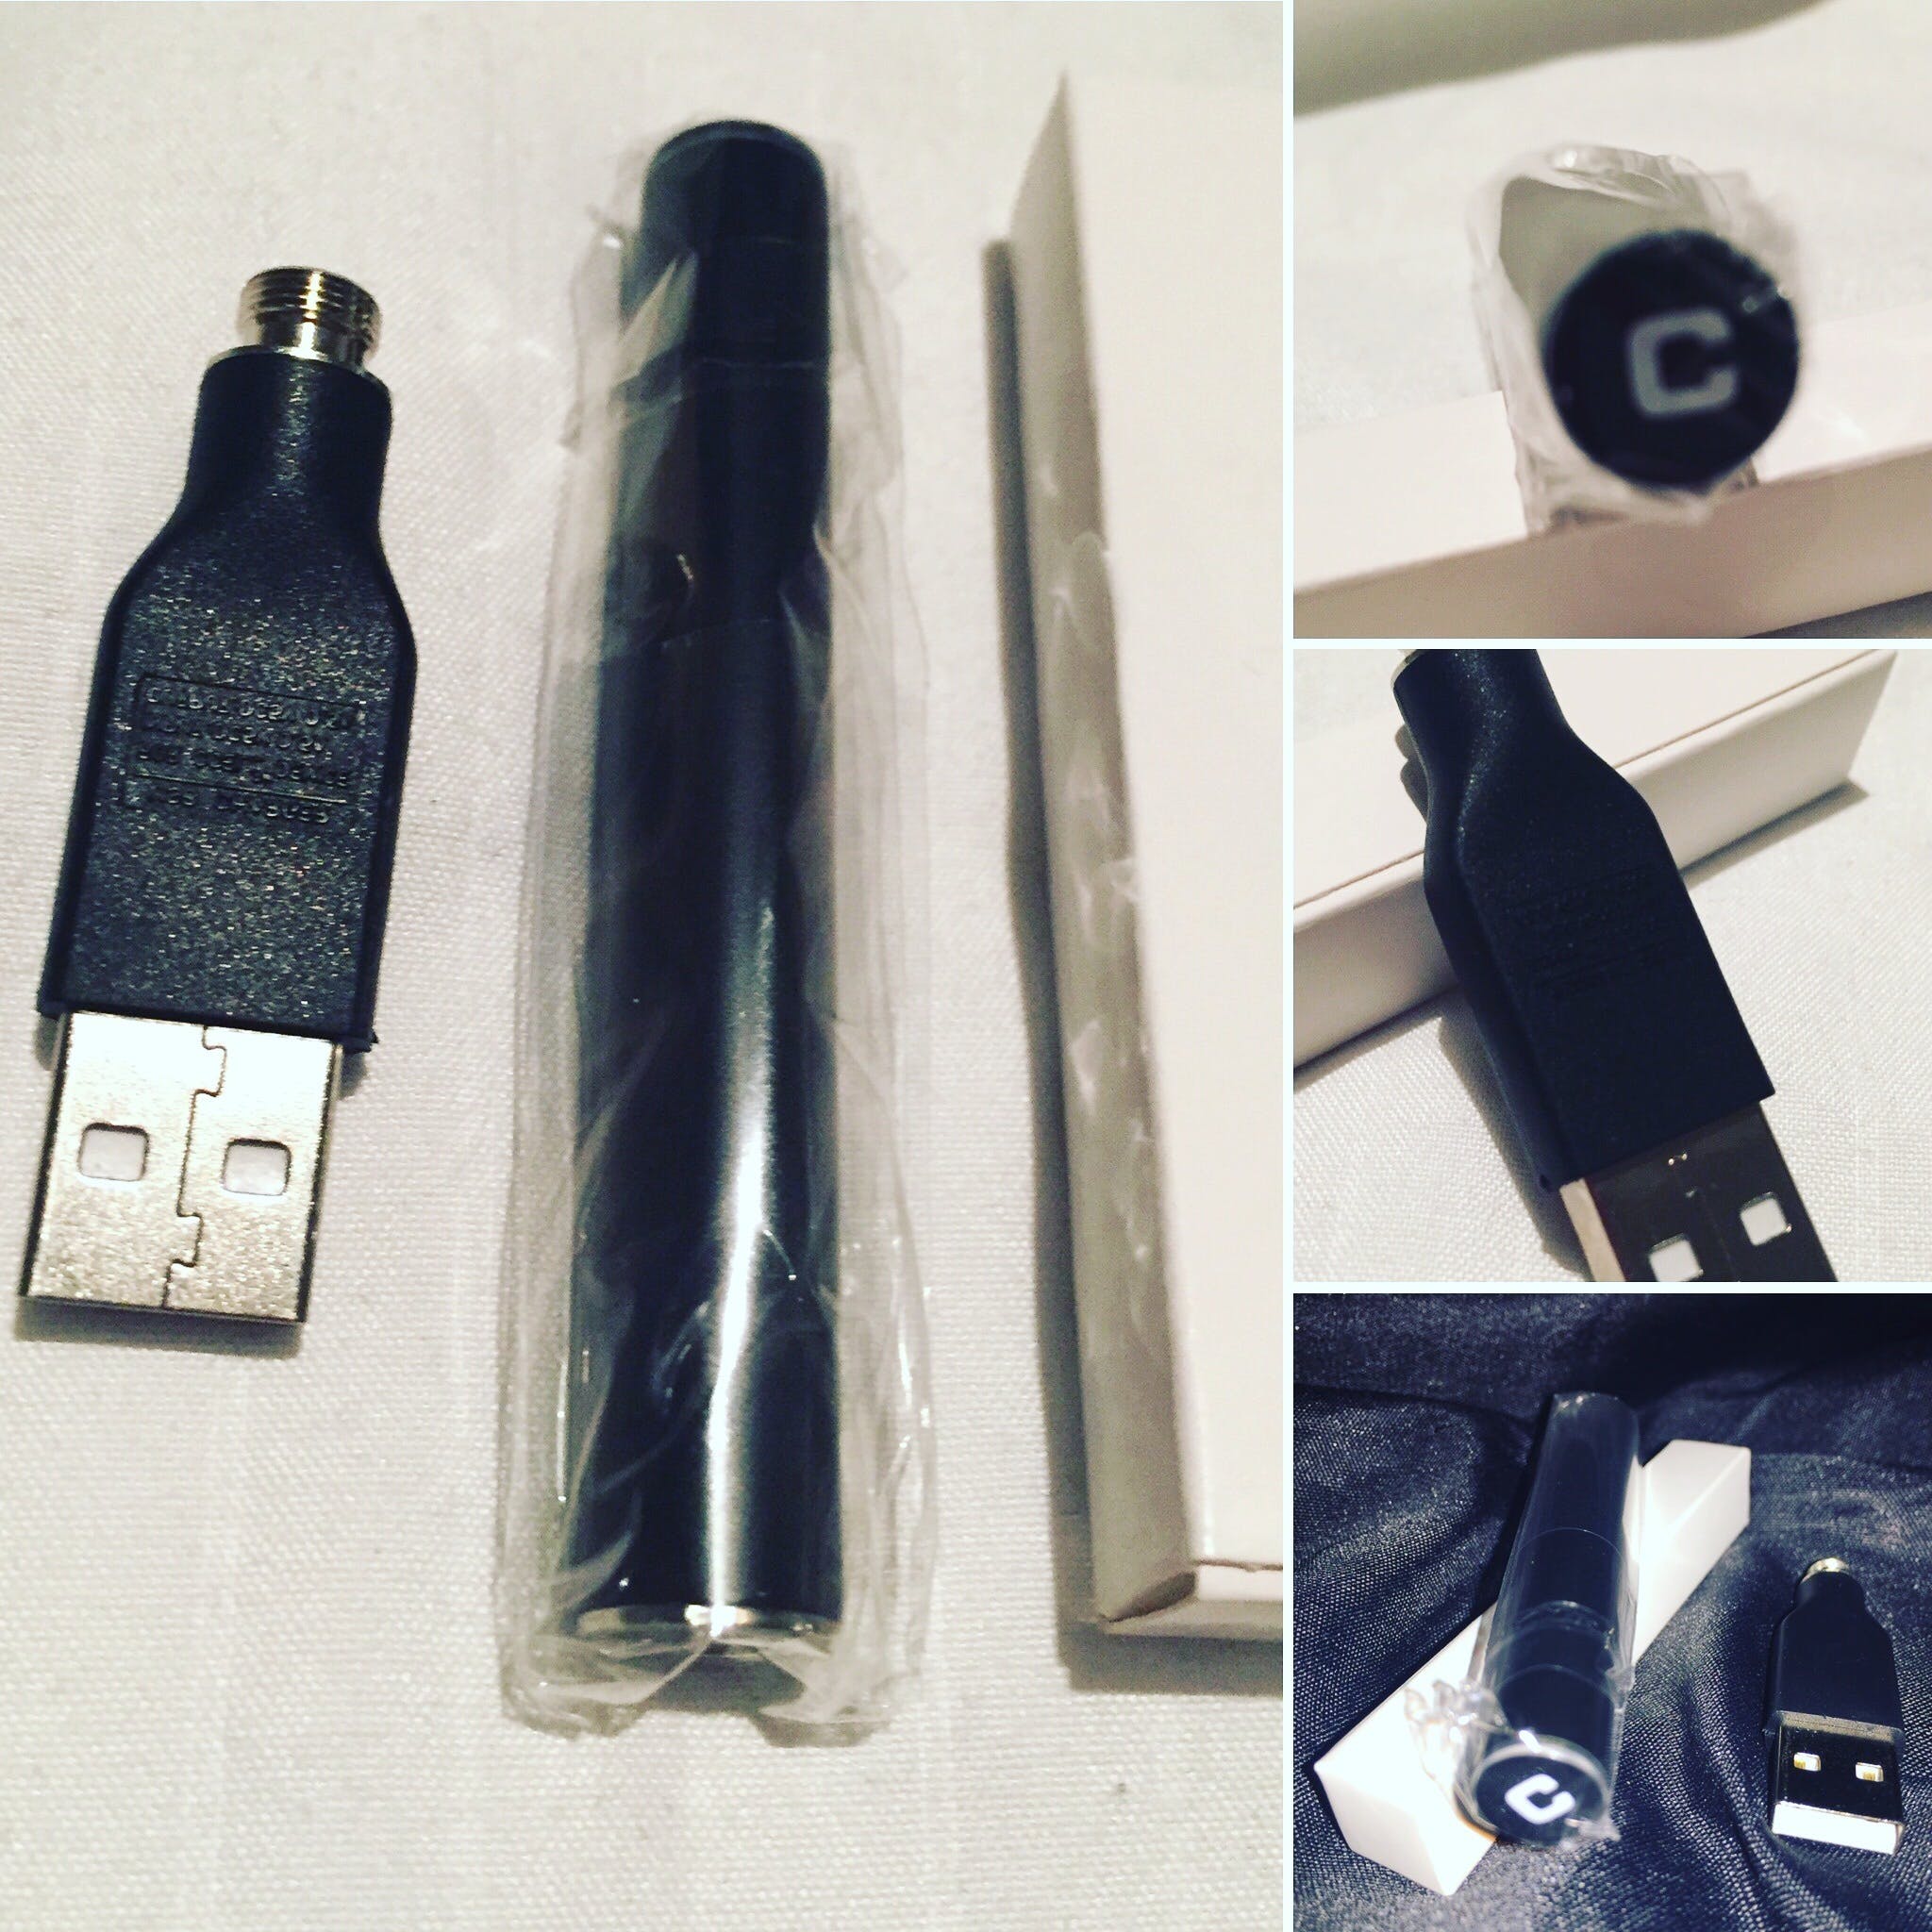 Top Quality Vape Pen w/ USB charger works with CCEL also